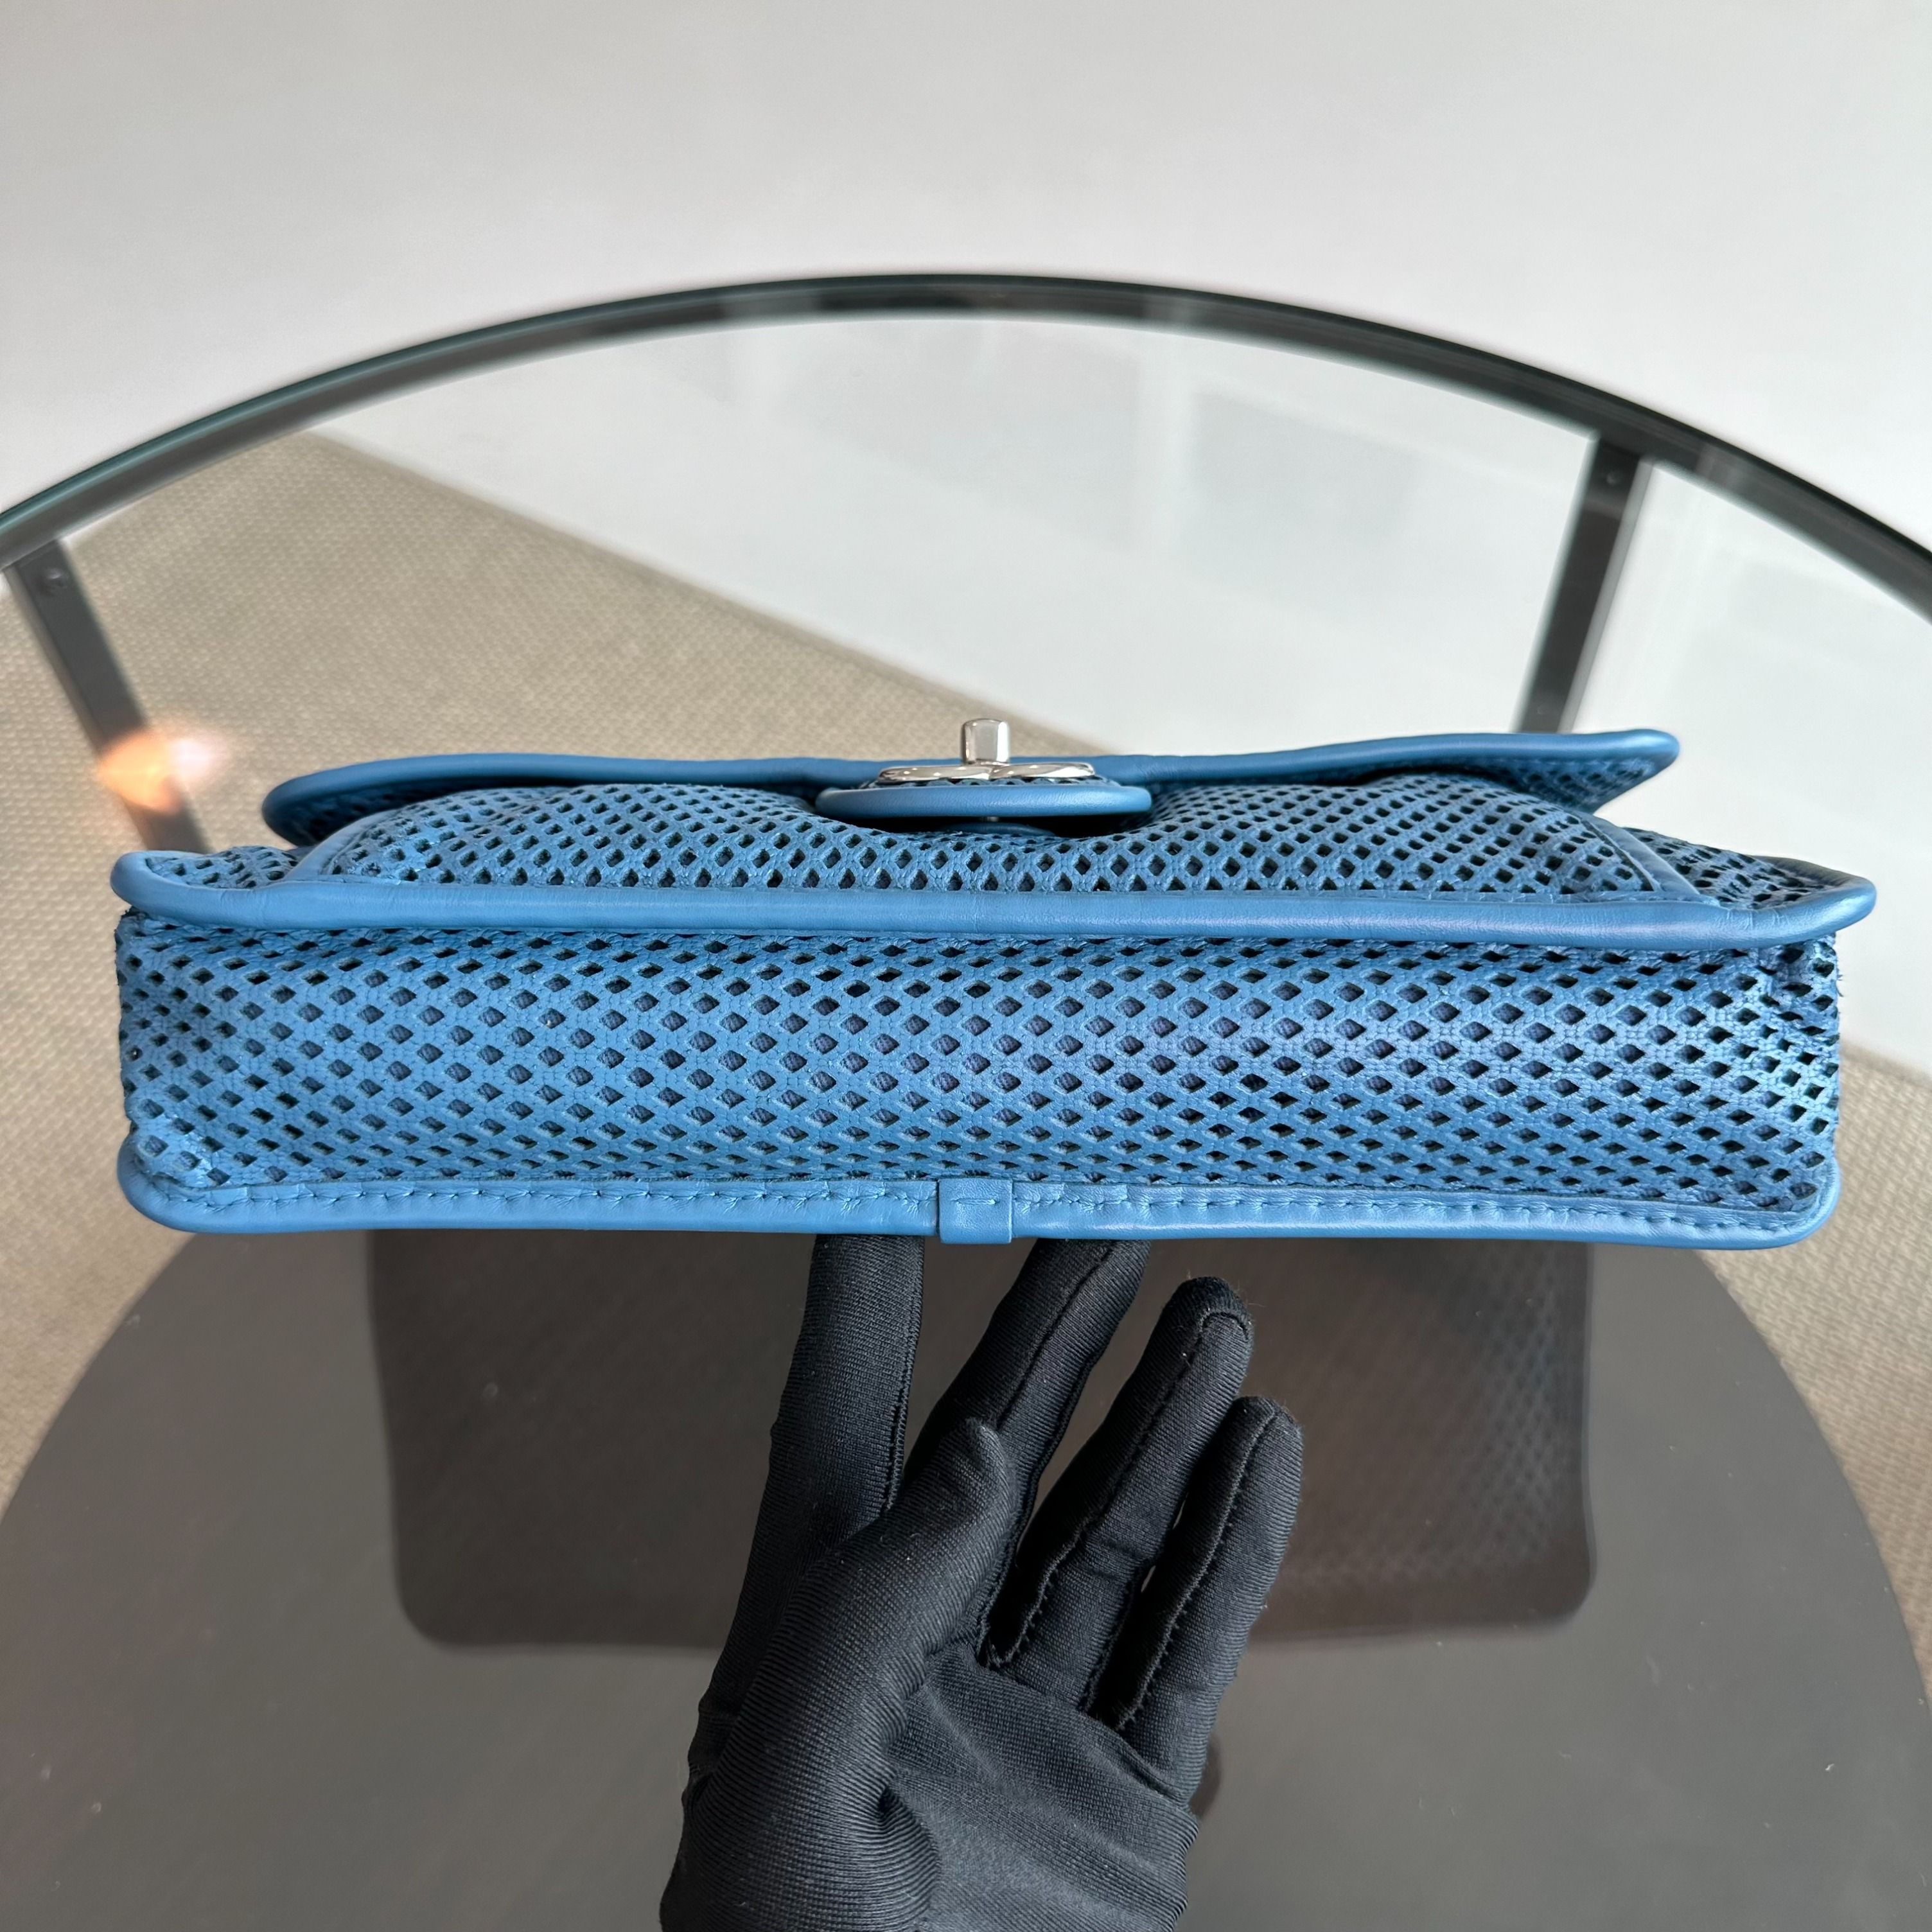 Chanel Flap Perforated French Riviera Up In The Air Blue SHW No 17